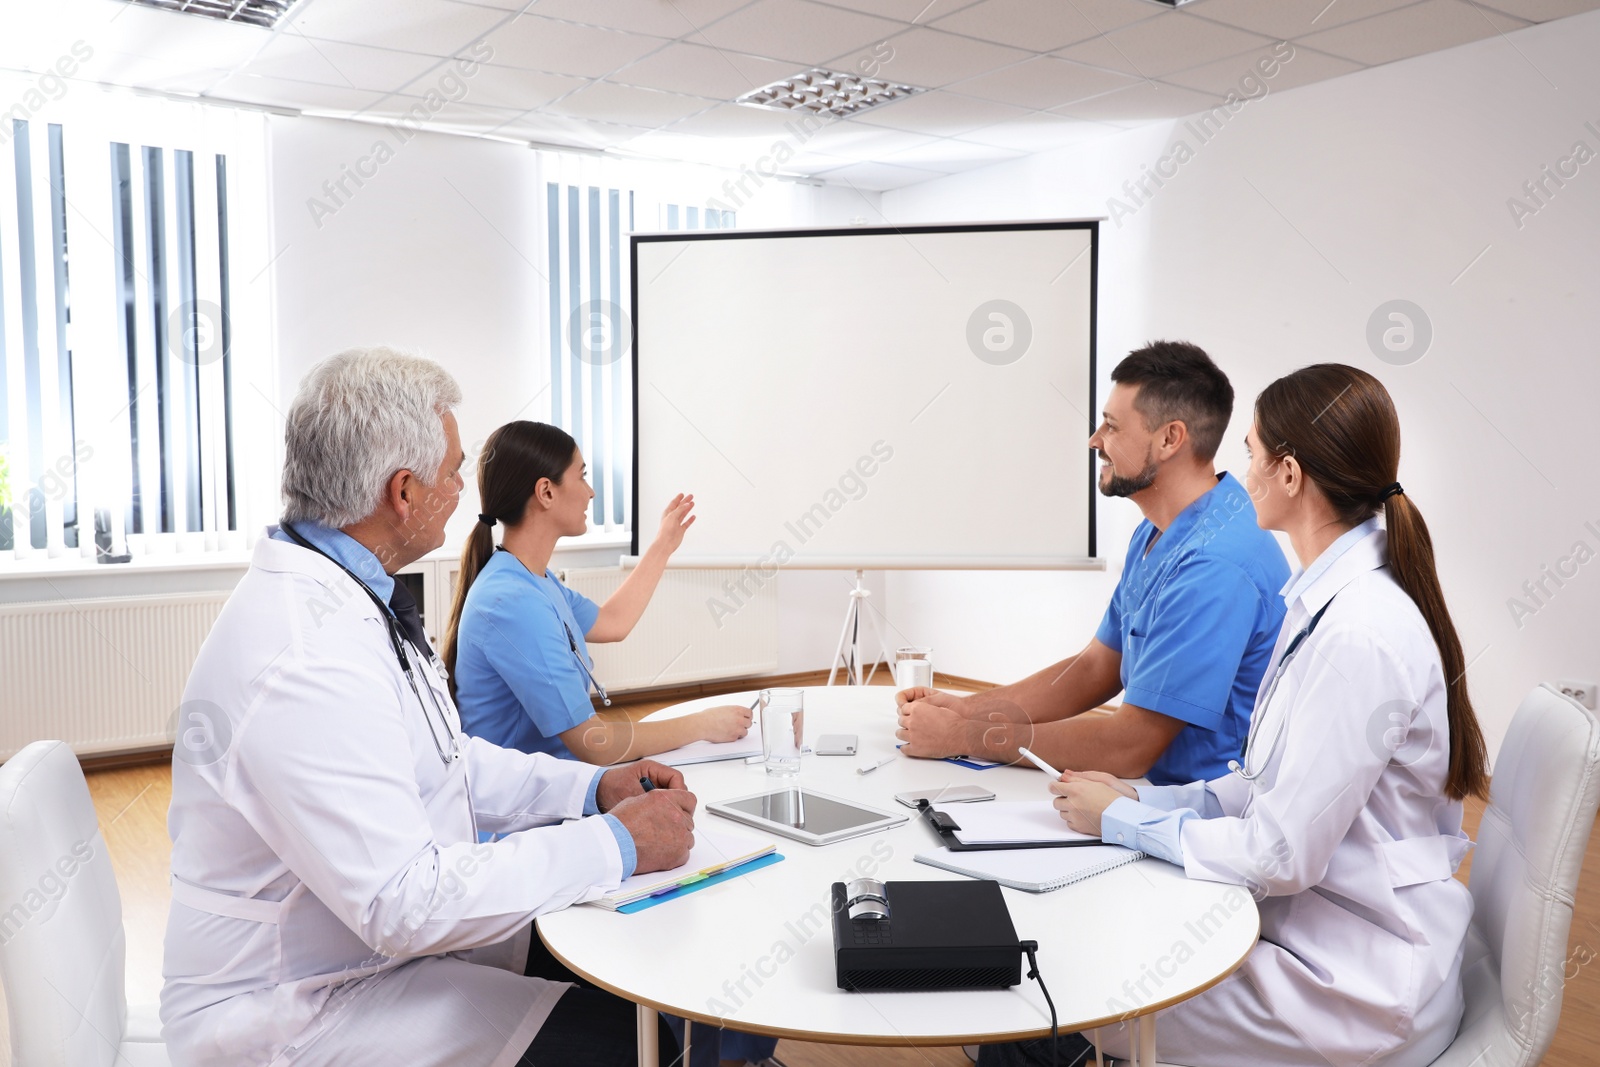 Photo of Team of doctors using video projector during conference indoors